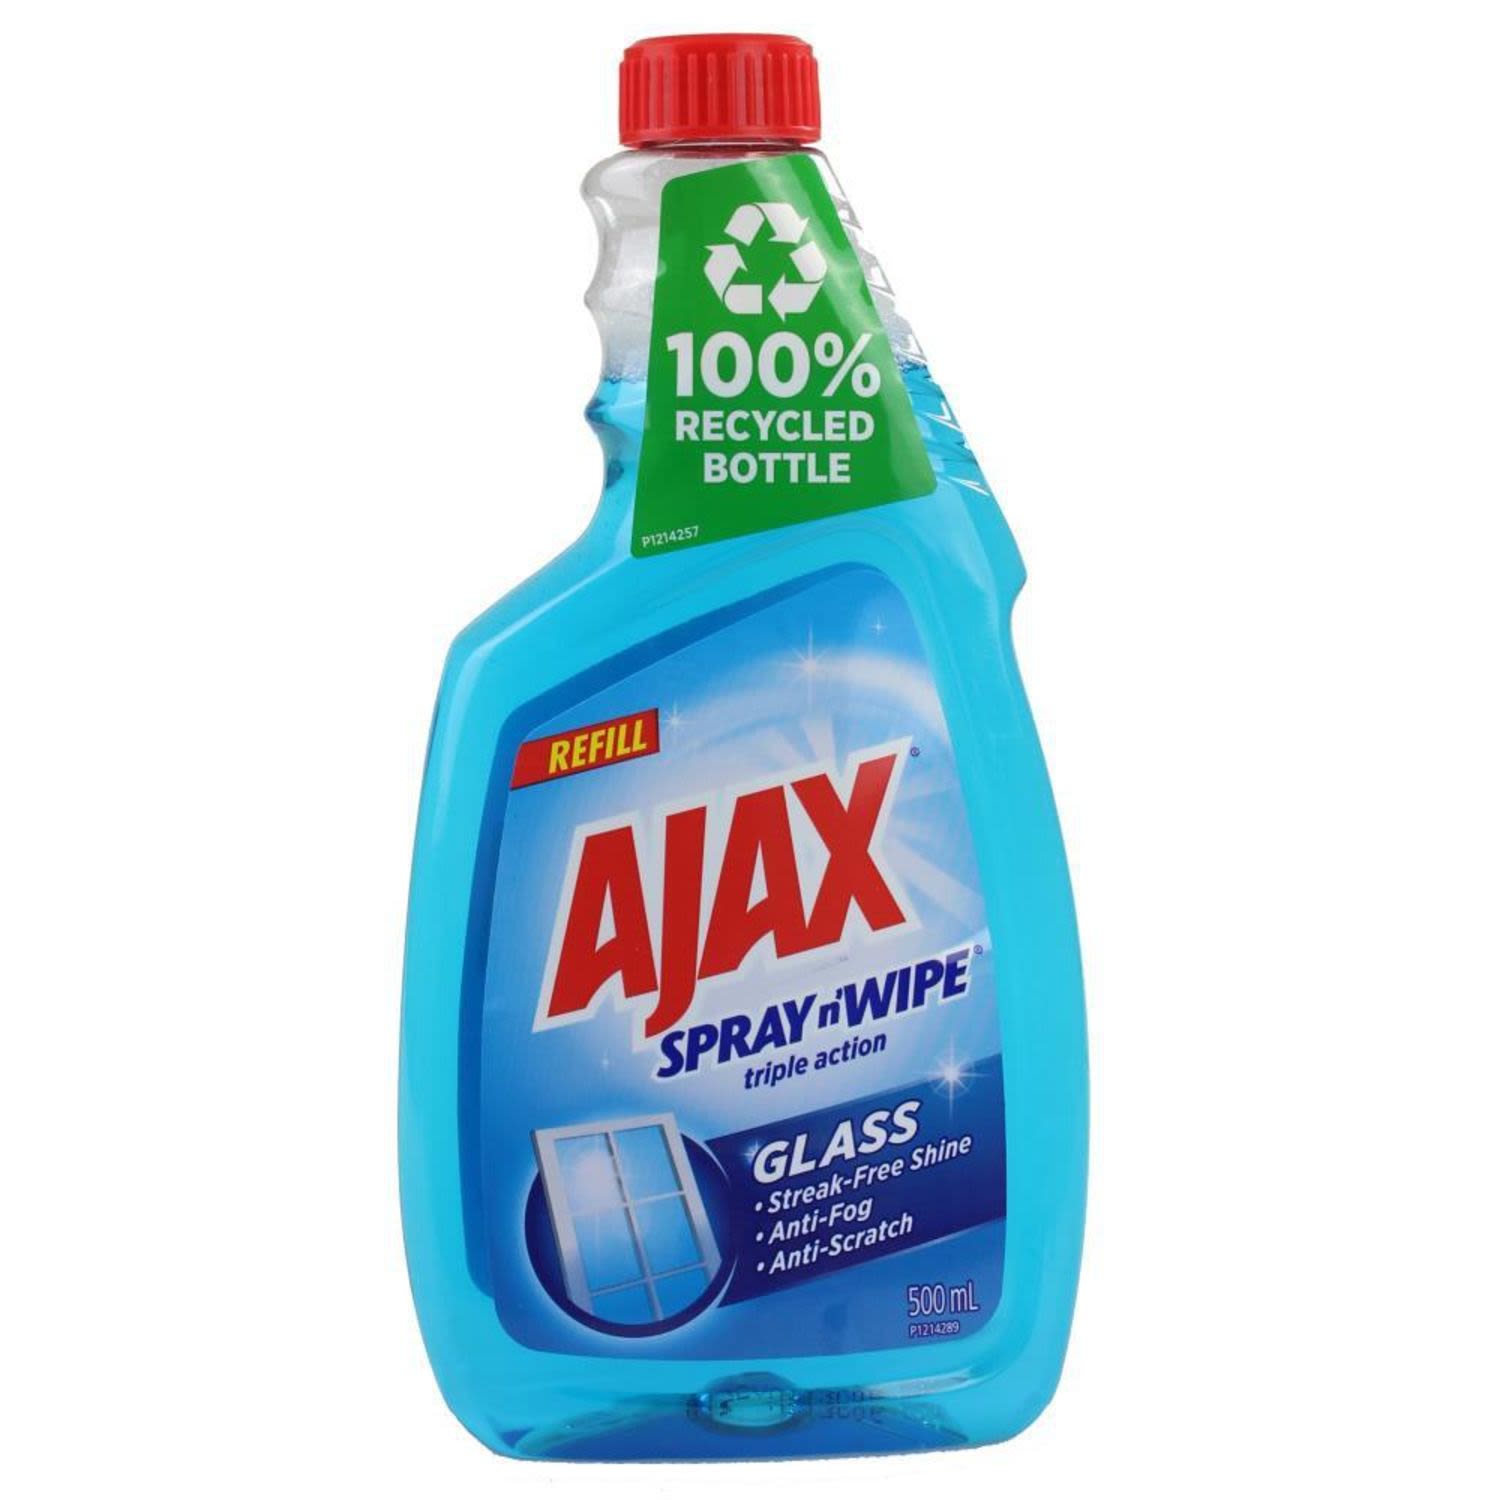 <p>Life is easy when you Spray n' Wipe!<br /><br />Fingerprints and dust shouldn't keep your surfaces from staying clean and clear. We help you brighten up your home with a streak-free and scratch-free shine.<br /><br />Ajax Spray n' Wipe Triple Action Glass Cleaner refill is Ammonia free.<br /><br />- Triple action glass cleaner<br />- Streak free shine<br />- Anti-fog<br />- Anti-scratch<br />- 100% Recycled and recyclable bottle<br />- Proudly Made in Australia<br /><br />To clean:<br />Simply spray and wipe until dry with a paper towel or lint free cloth. For best results, change cloth frequently.<br /><br />Advice: <br />Do not use on tinted glass.<br /><br />Size: 500mL Refill for Trigger<br />Type: Glass Cleaner Refill</p><br /> <br /> <br /><br />Country of Origin: Made in Australia from local and imported components